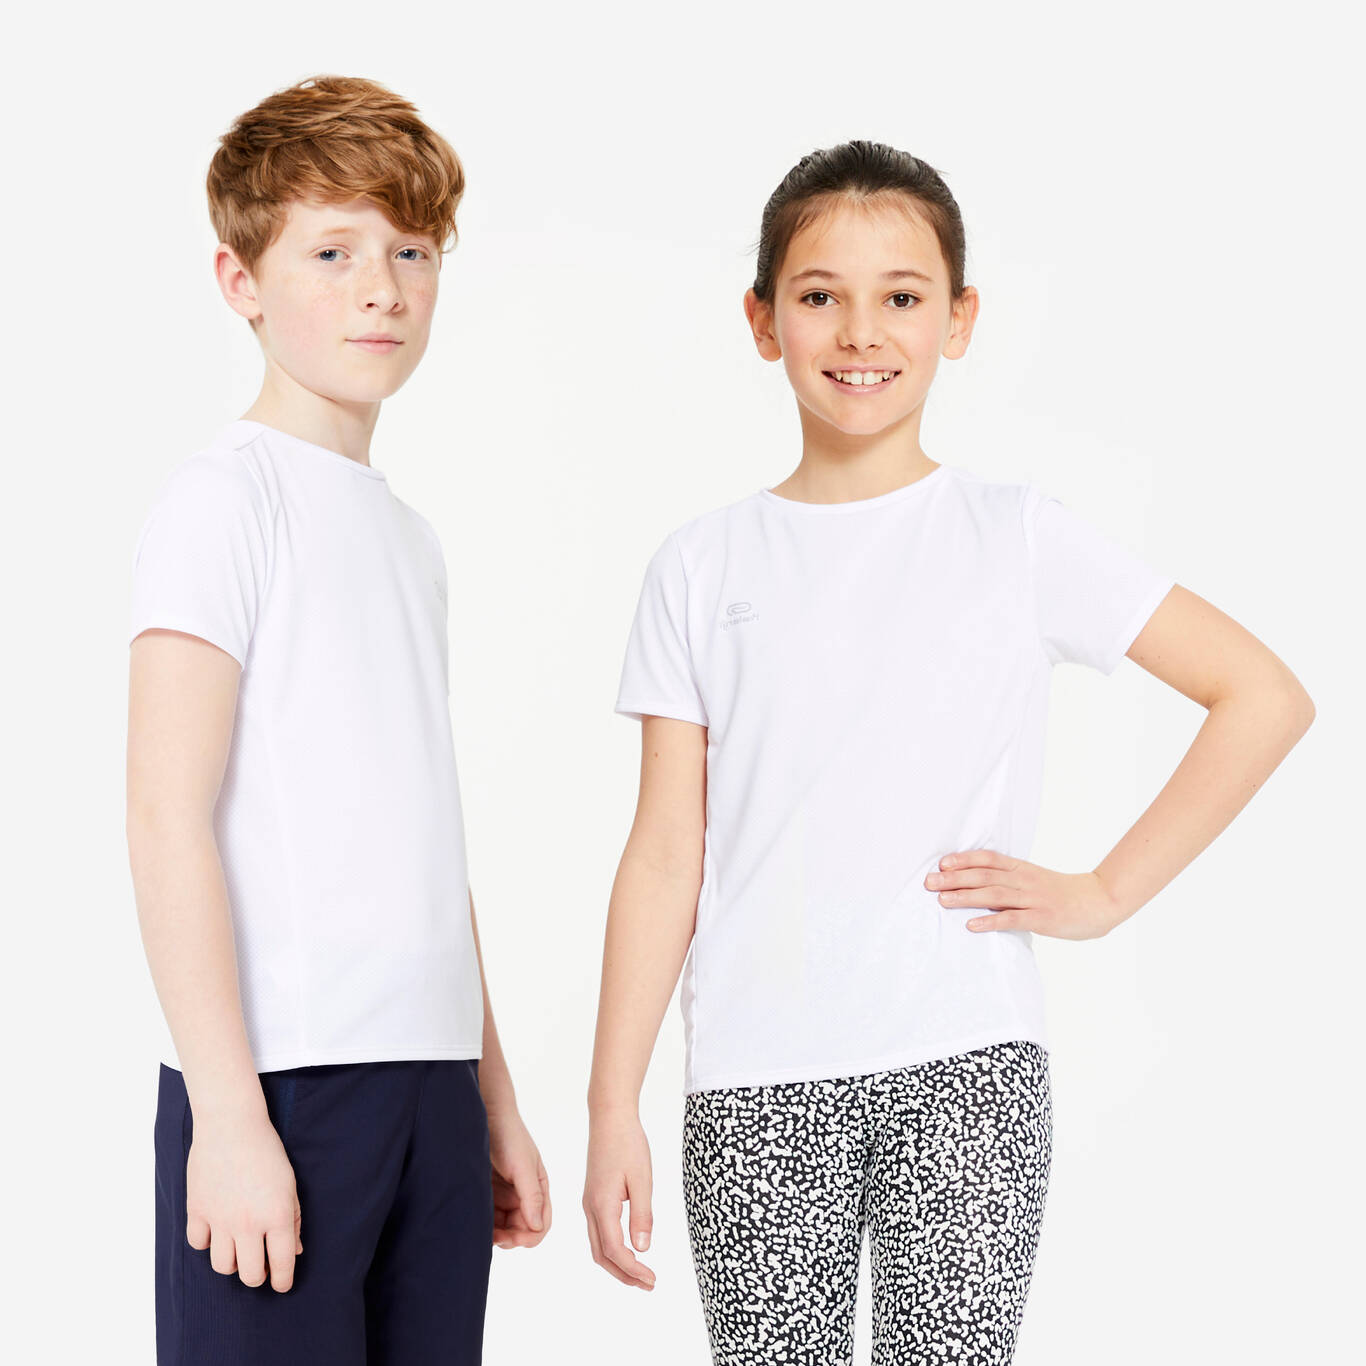 Kids' Breathable T-Shirt